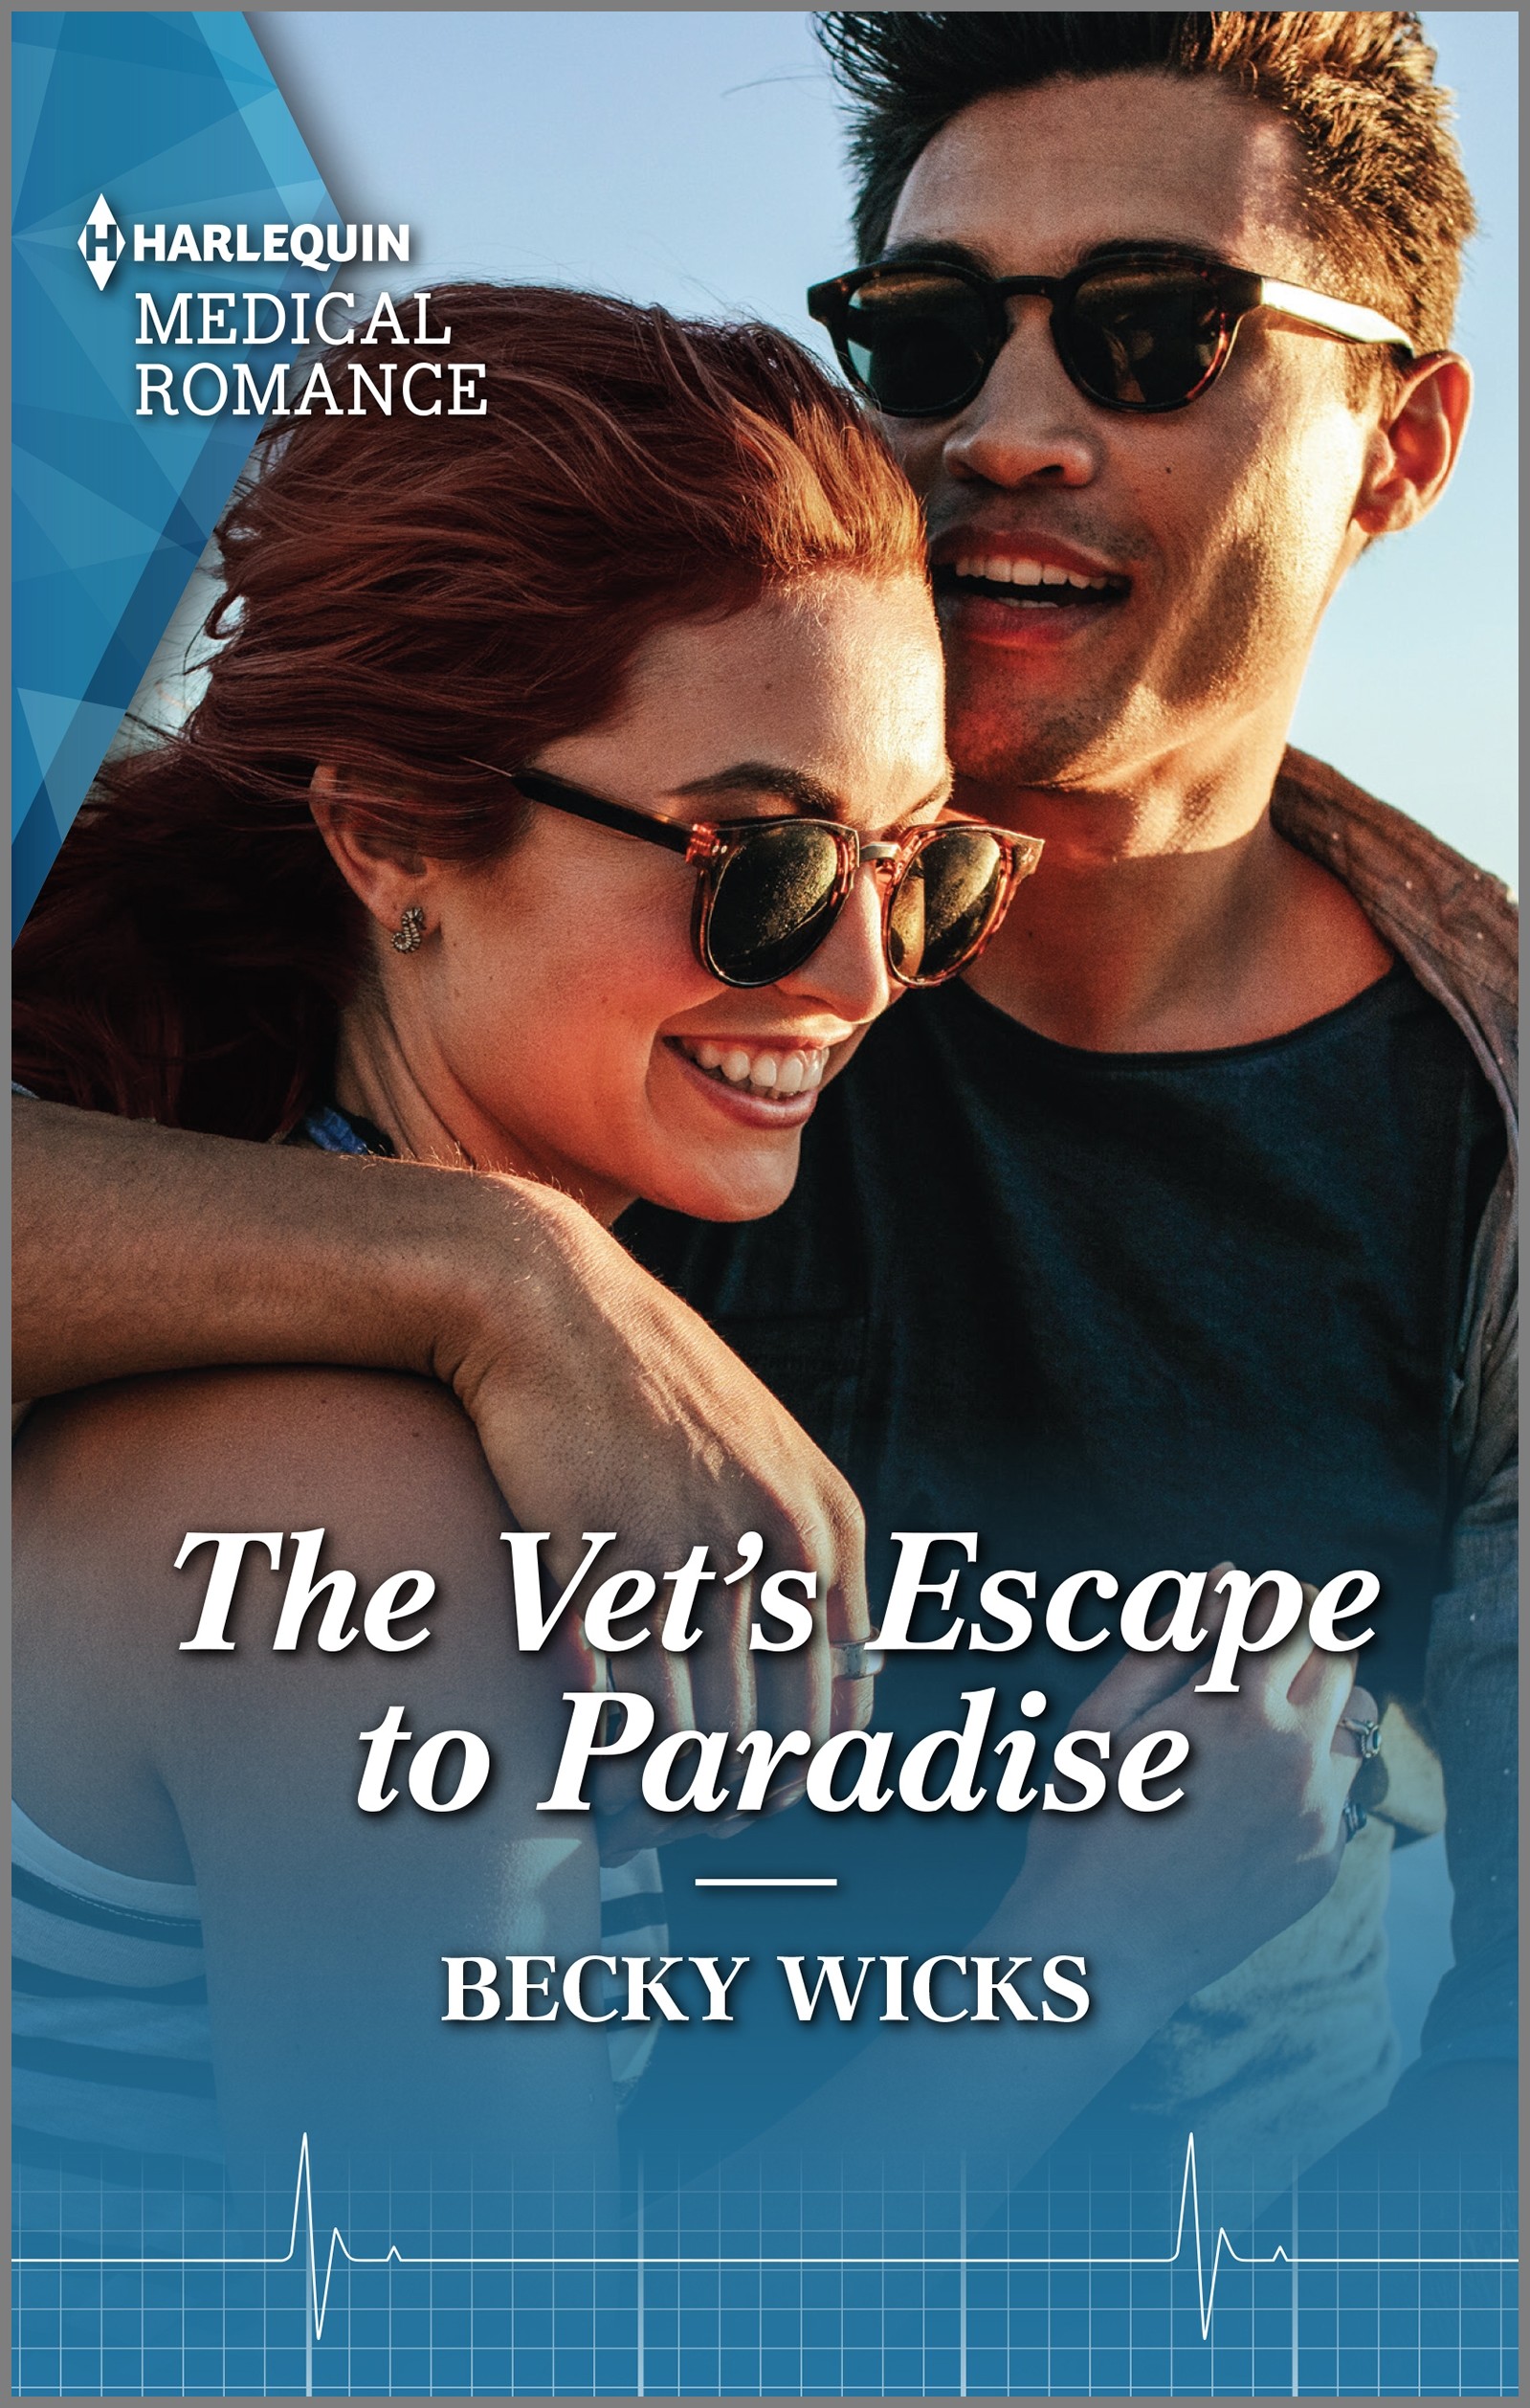 The Vet's Escape to Paradise by Becky Wicks